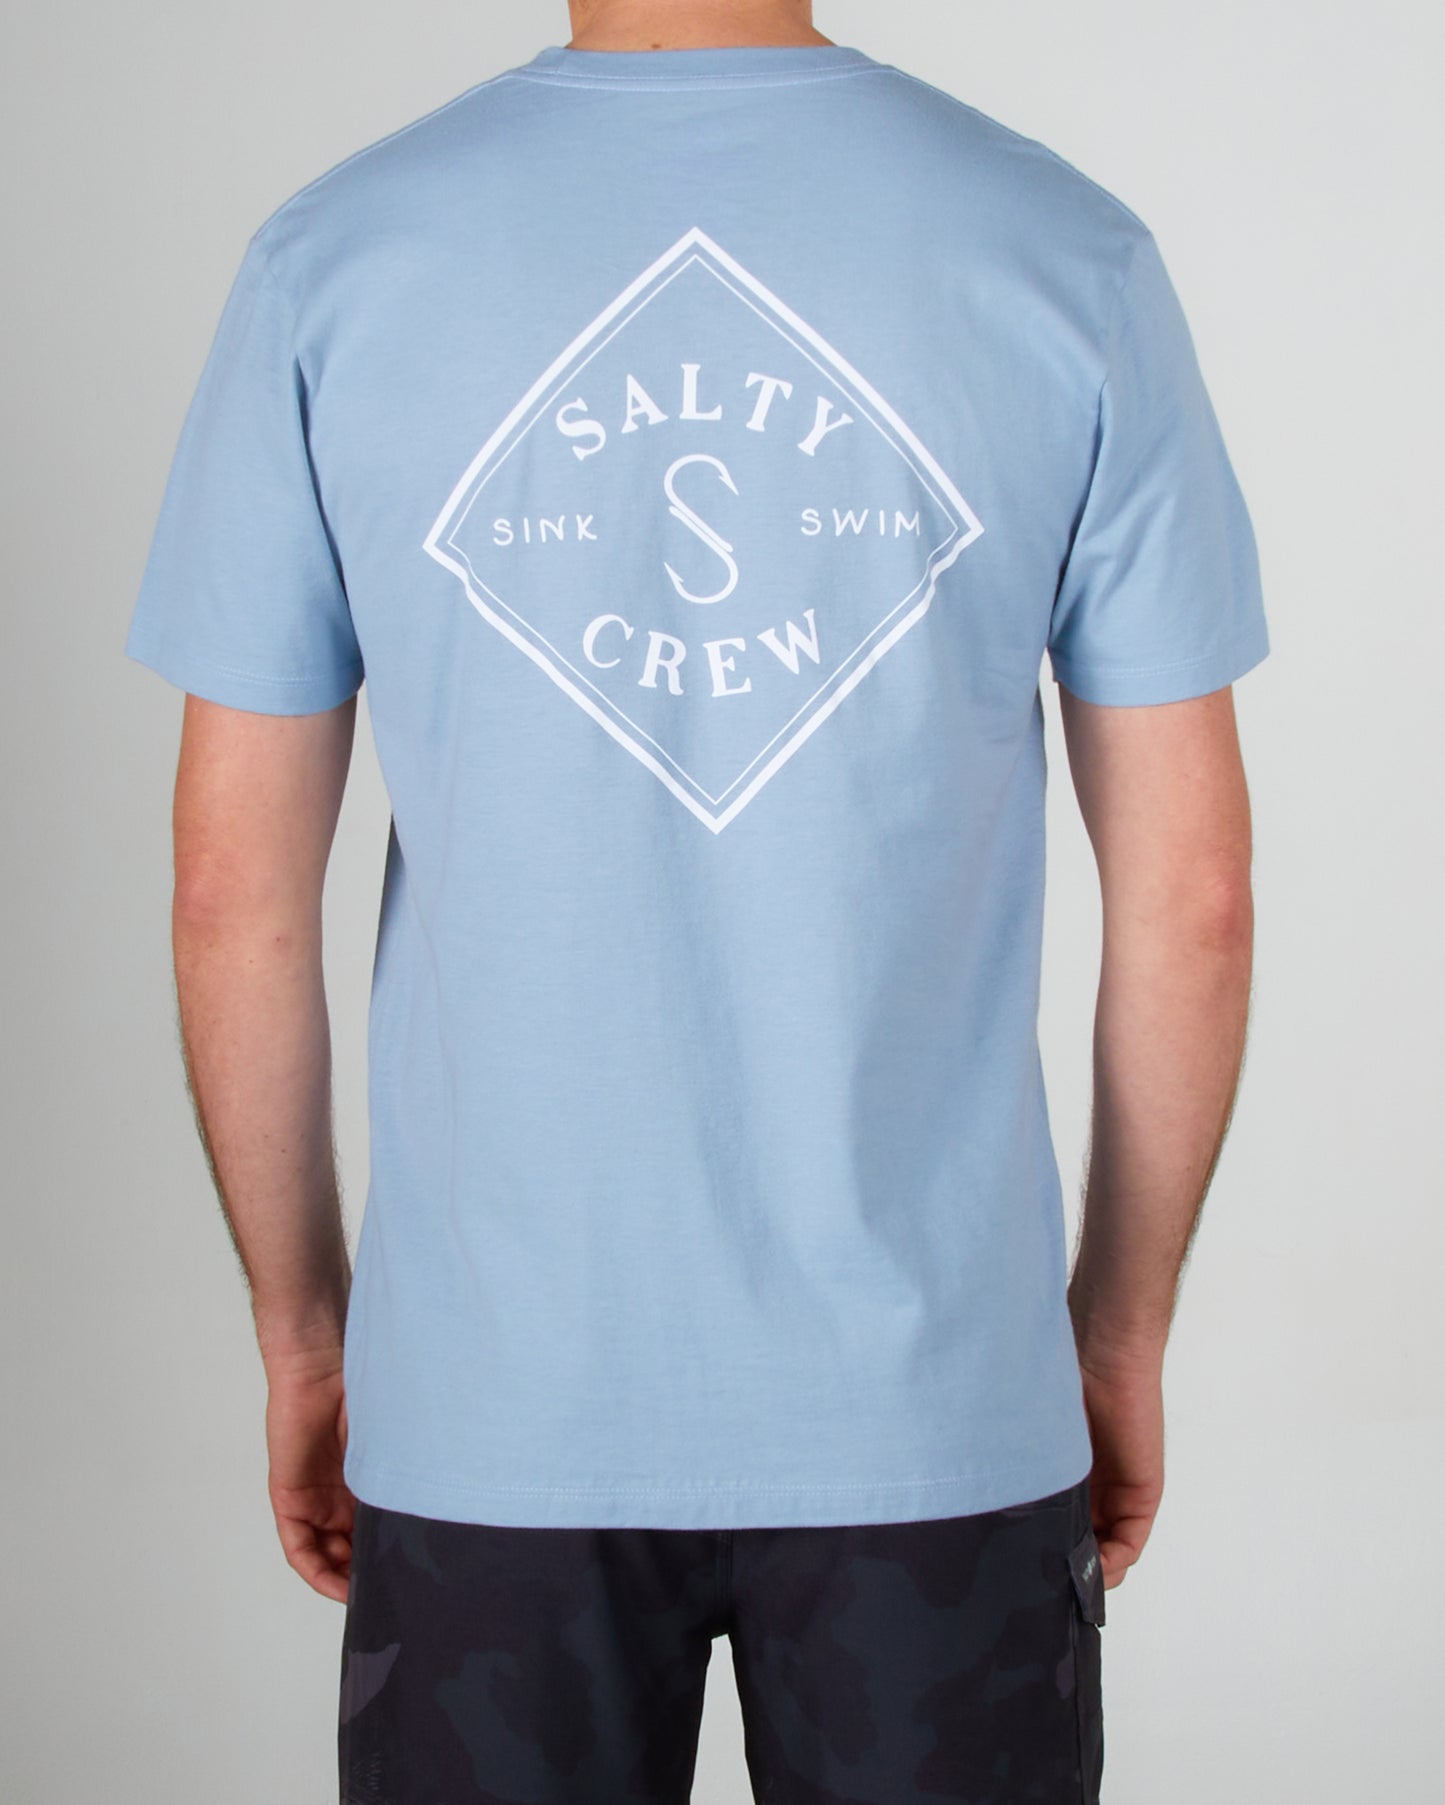 on body back view of the Tippet Marine Blue S/S Premium Tee